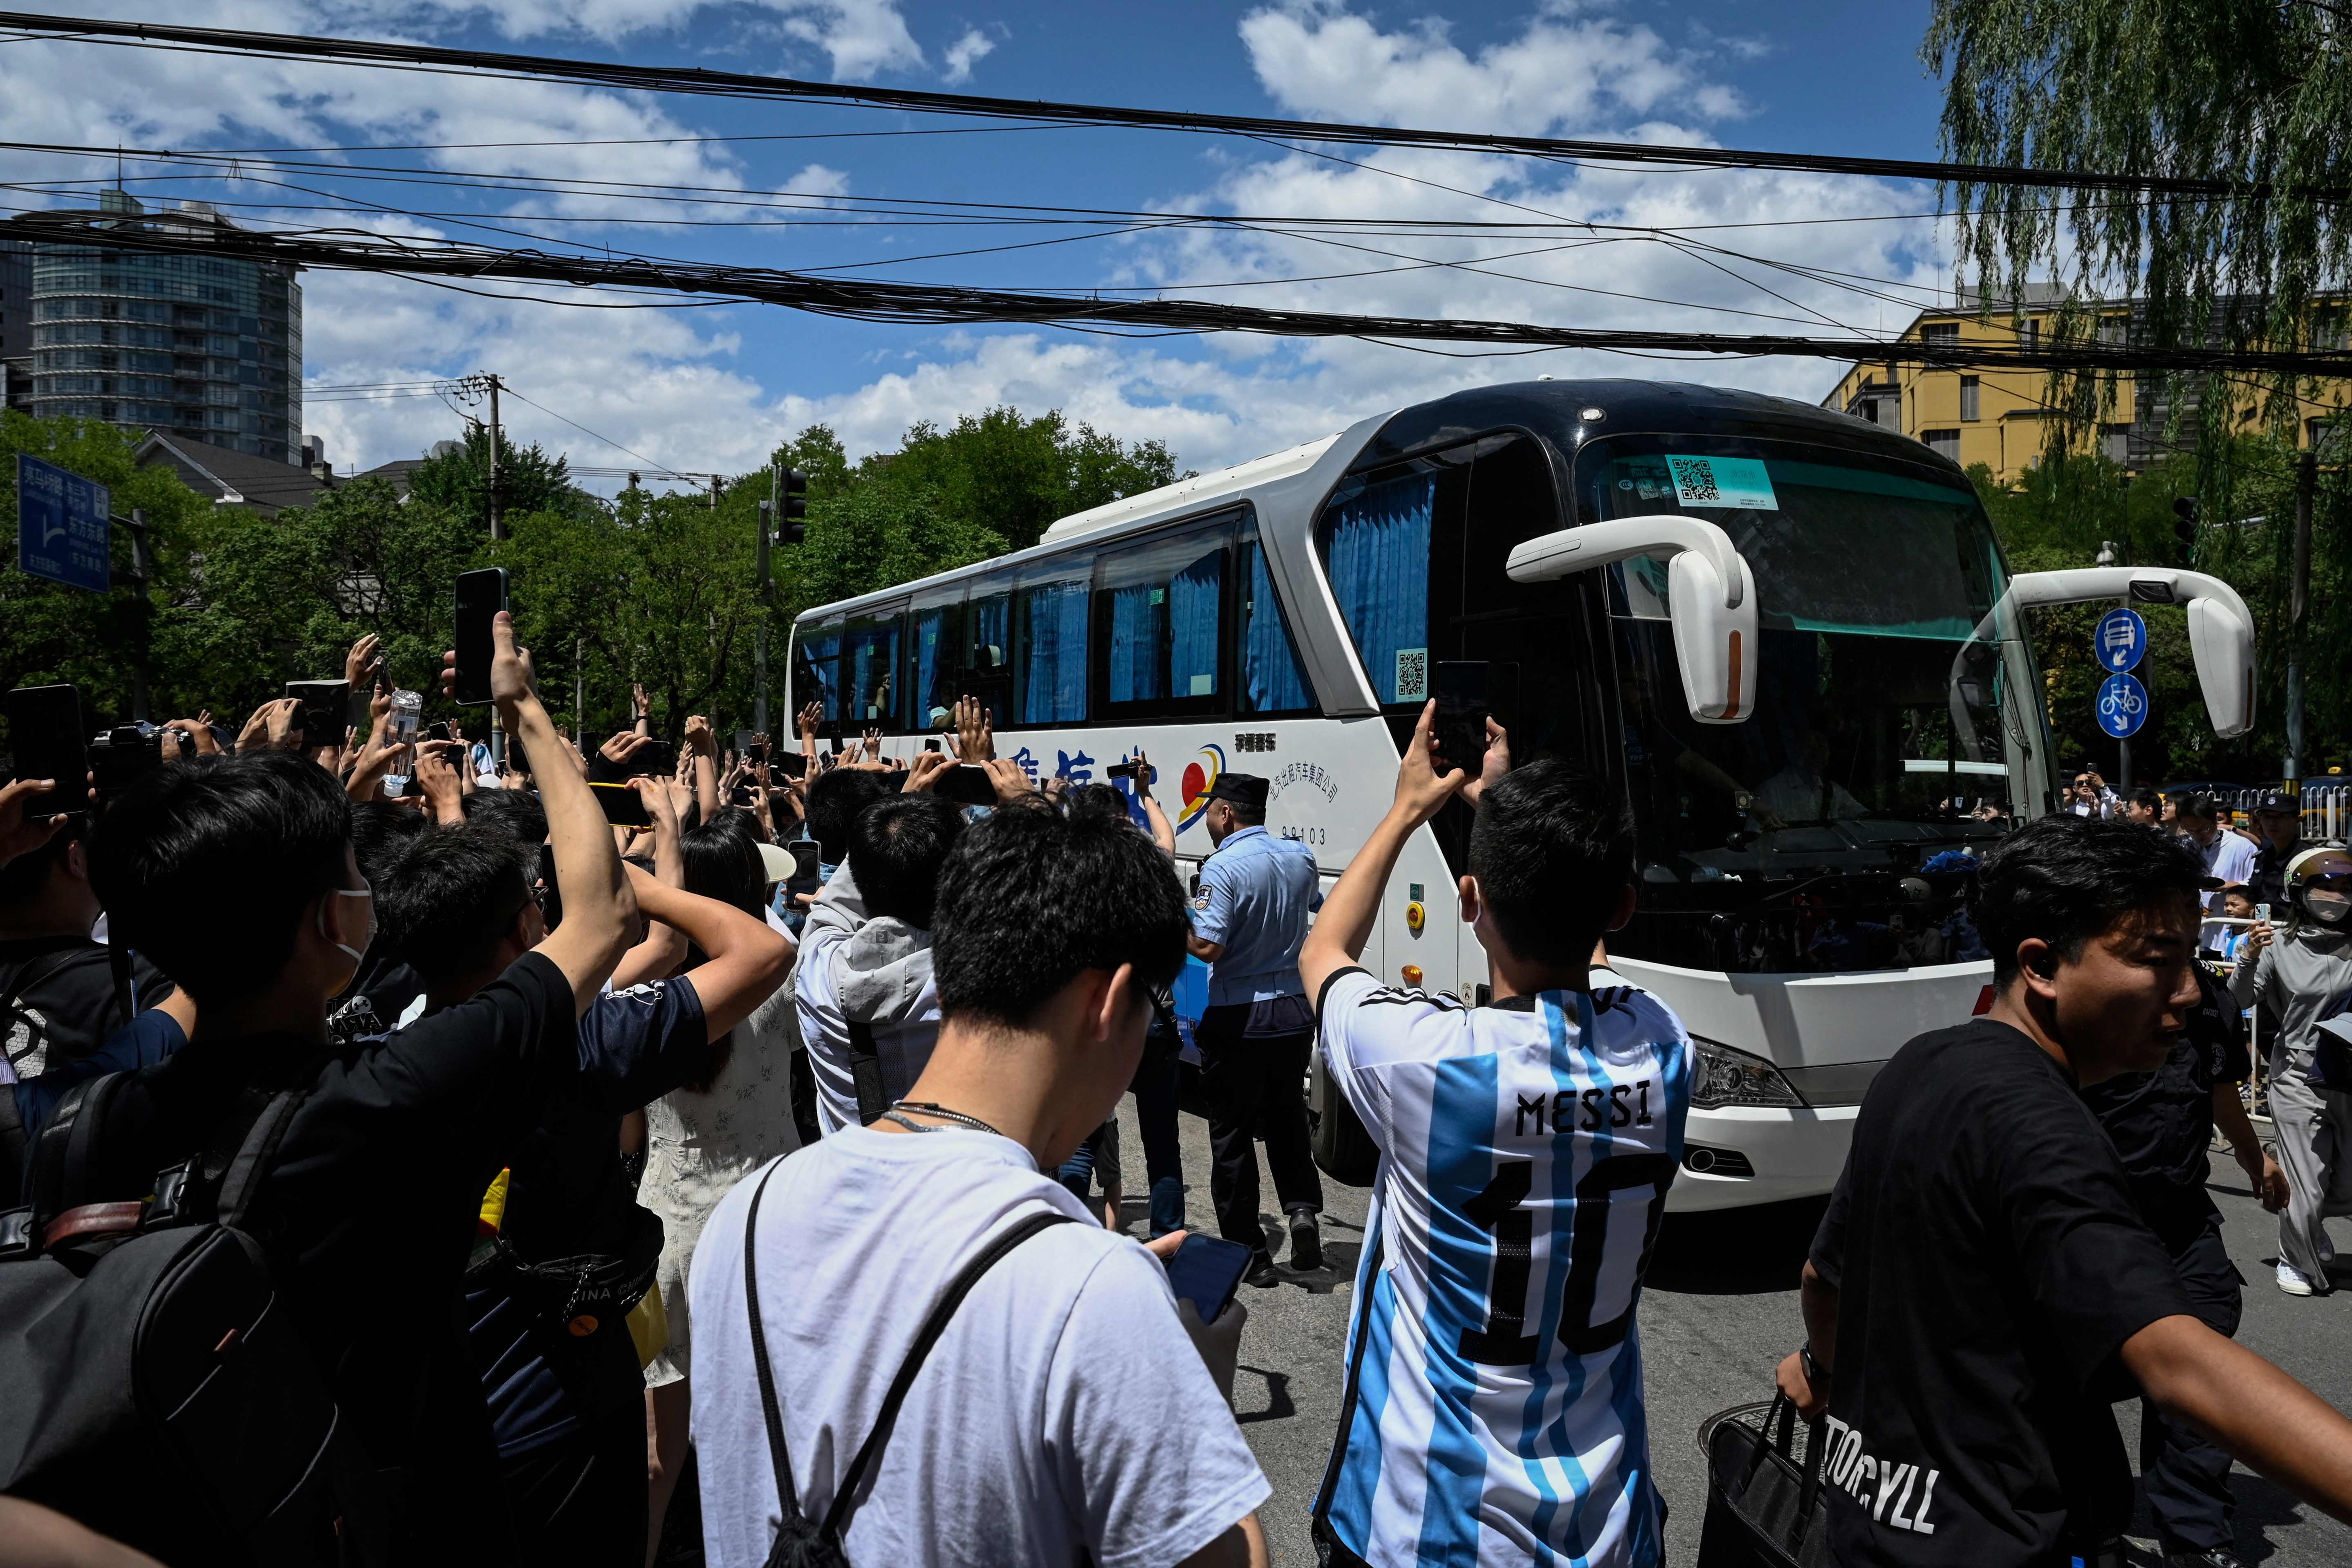 Chinese fans cheer as members of Argentina's football team arrive at a hotel in Beijing on June 10, 2023. Argentina will play a friendly football match against Australia on June 15 at Beijing's newly-renovated 68,000-capacity Workers' Stadium. (Photo by Jade GAO / AFP)